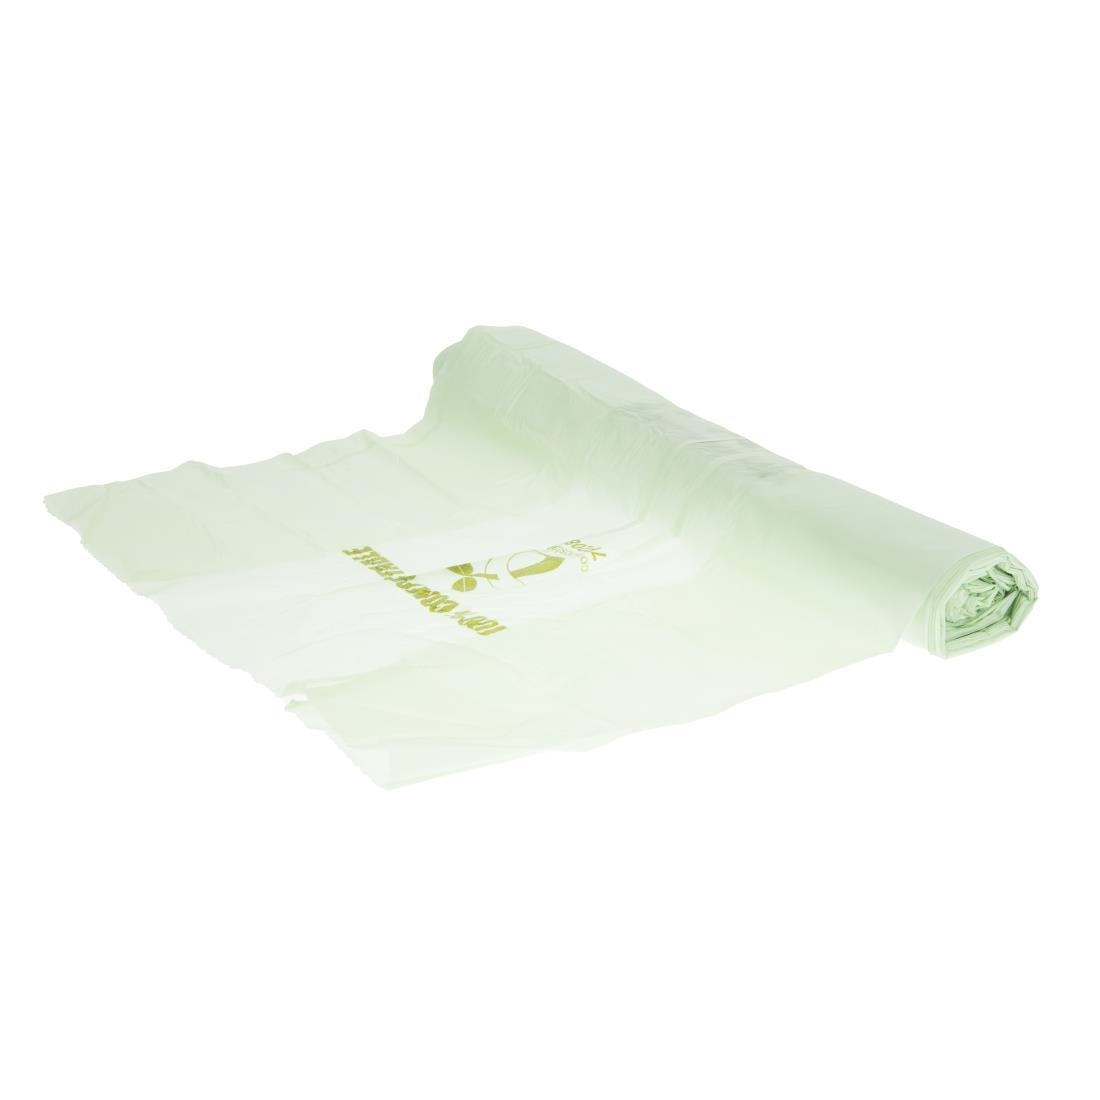 Jantex Large Compostable Bin Liners 90Ltr (Pack of 20) JD Catering Equipment Solutions Ltd